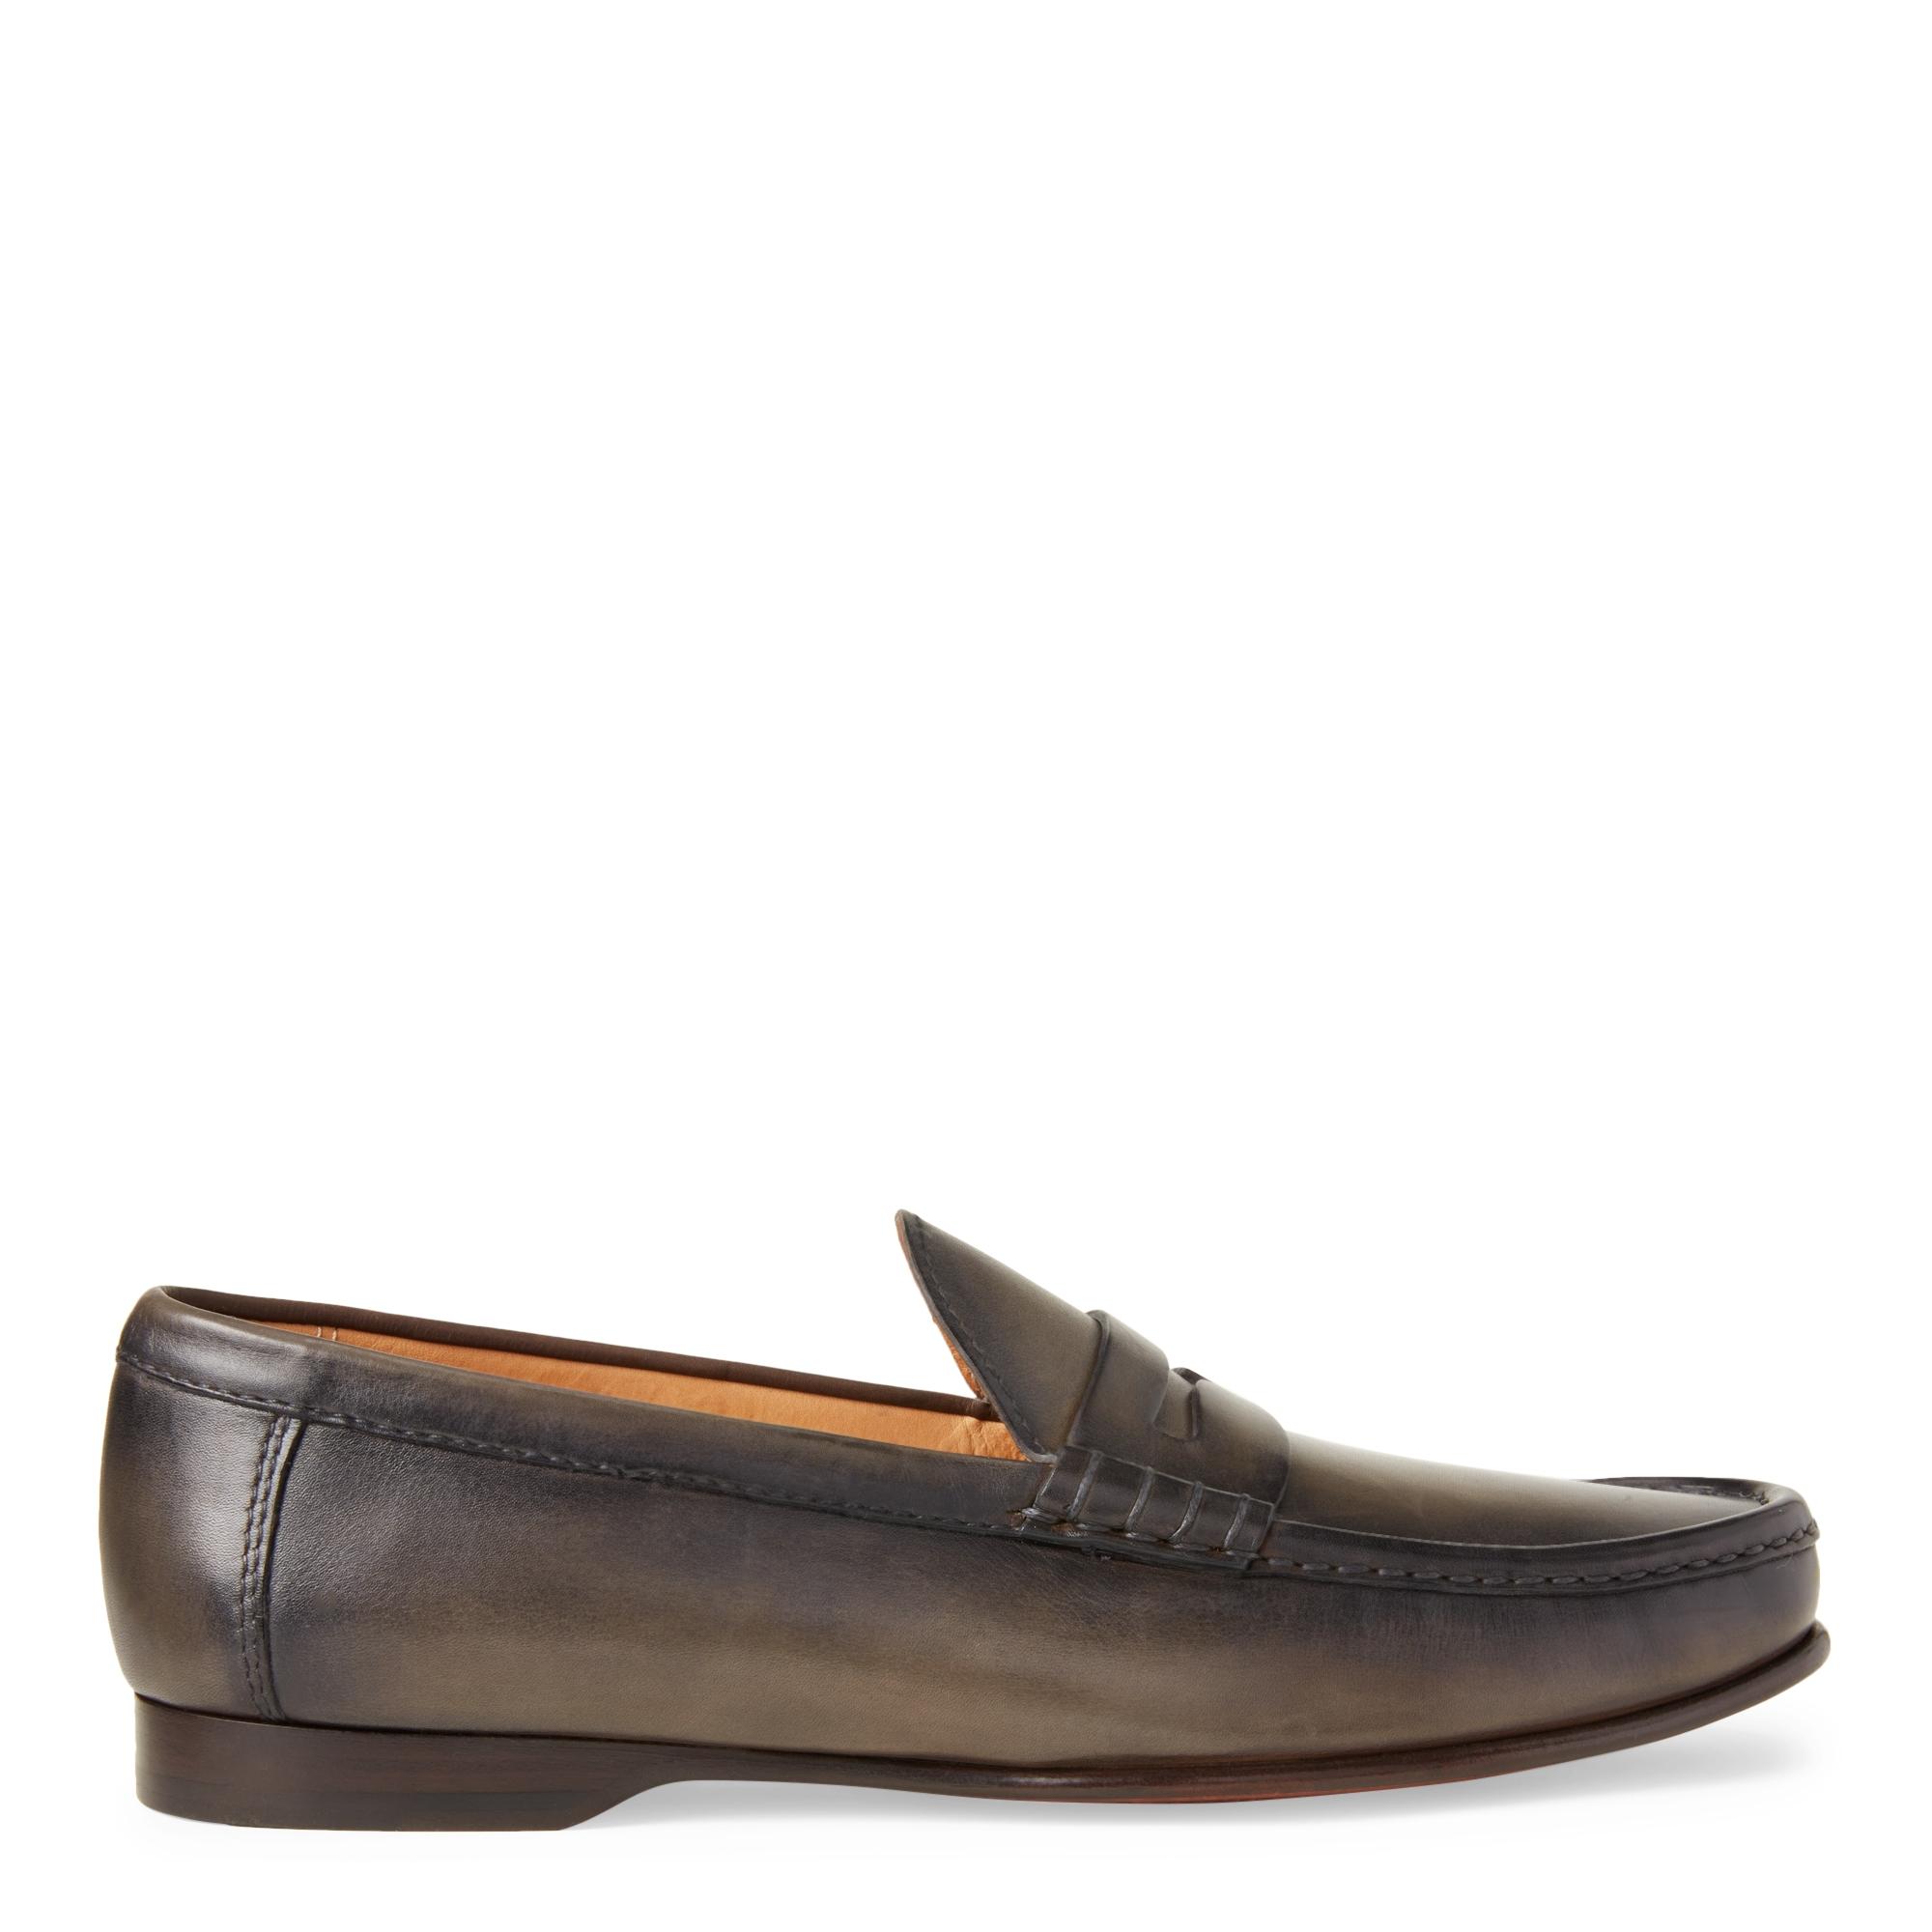 Ralph Lauren Purple Label Leather Chalmers Calfskin Penny Loafer in ...